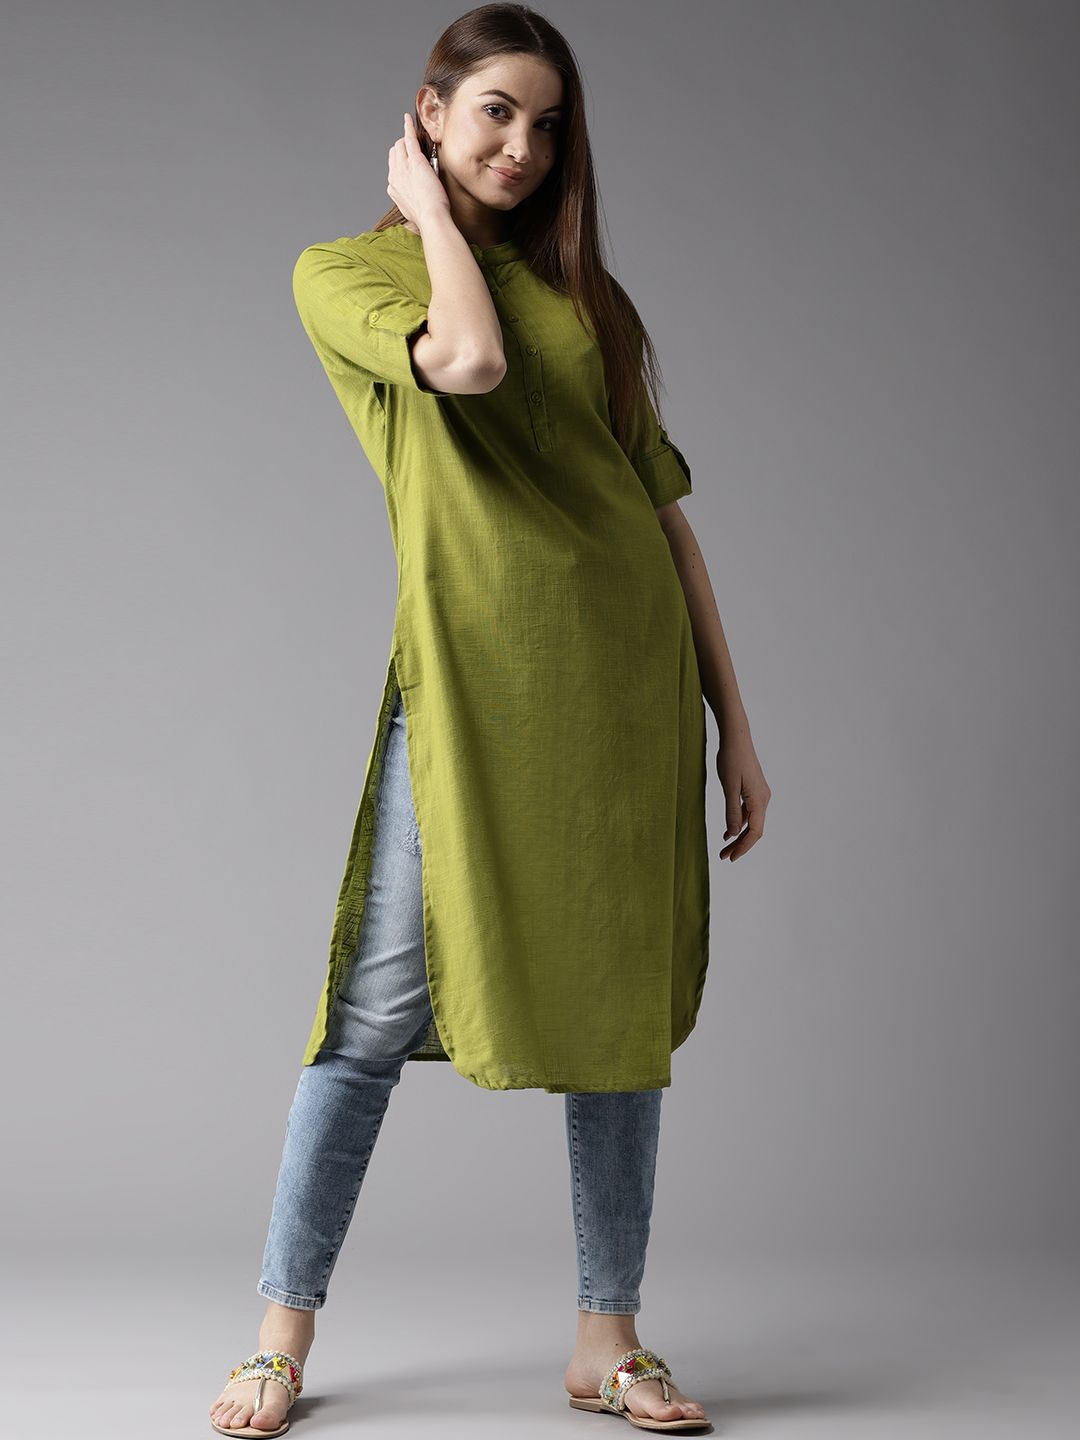 80% Off on Here And Now Kurta Starts from Rs. 259